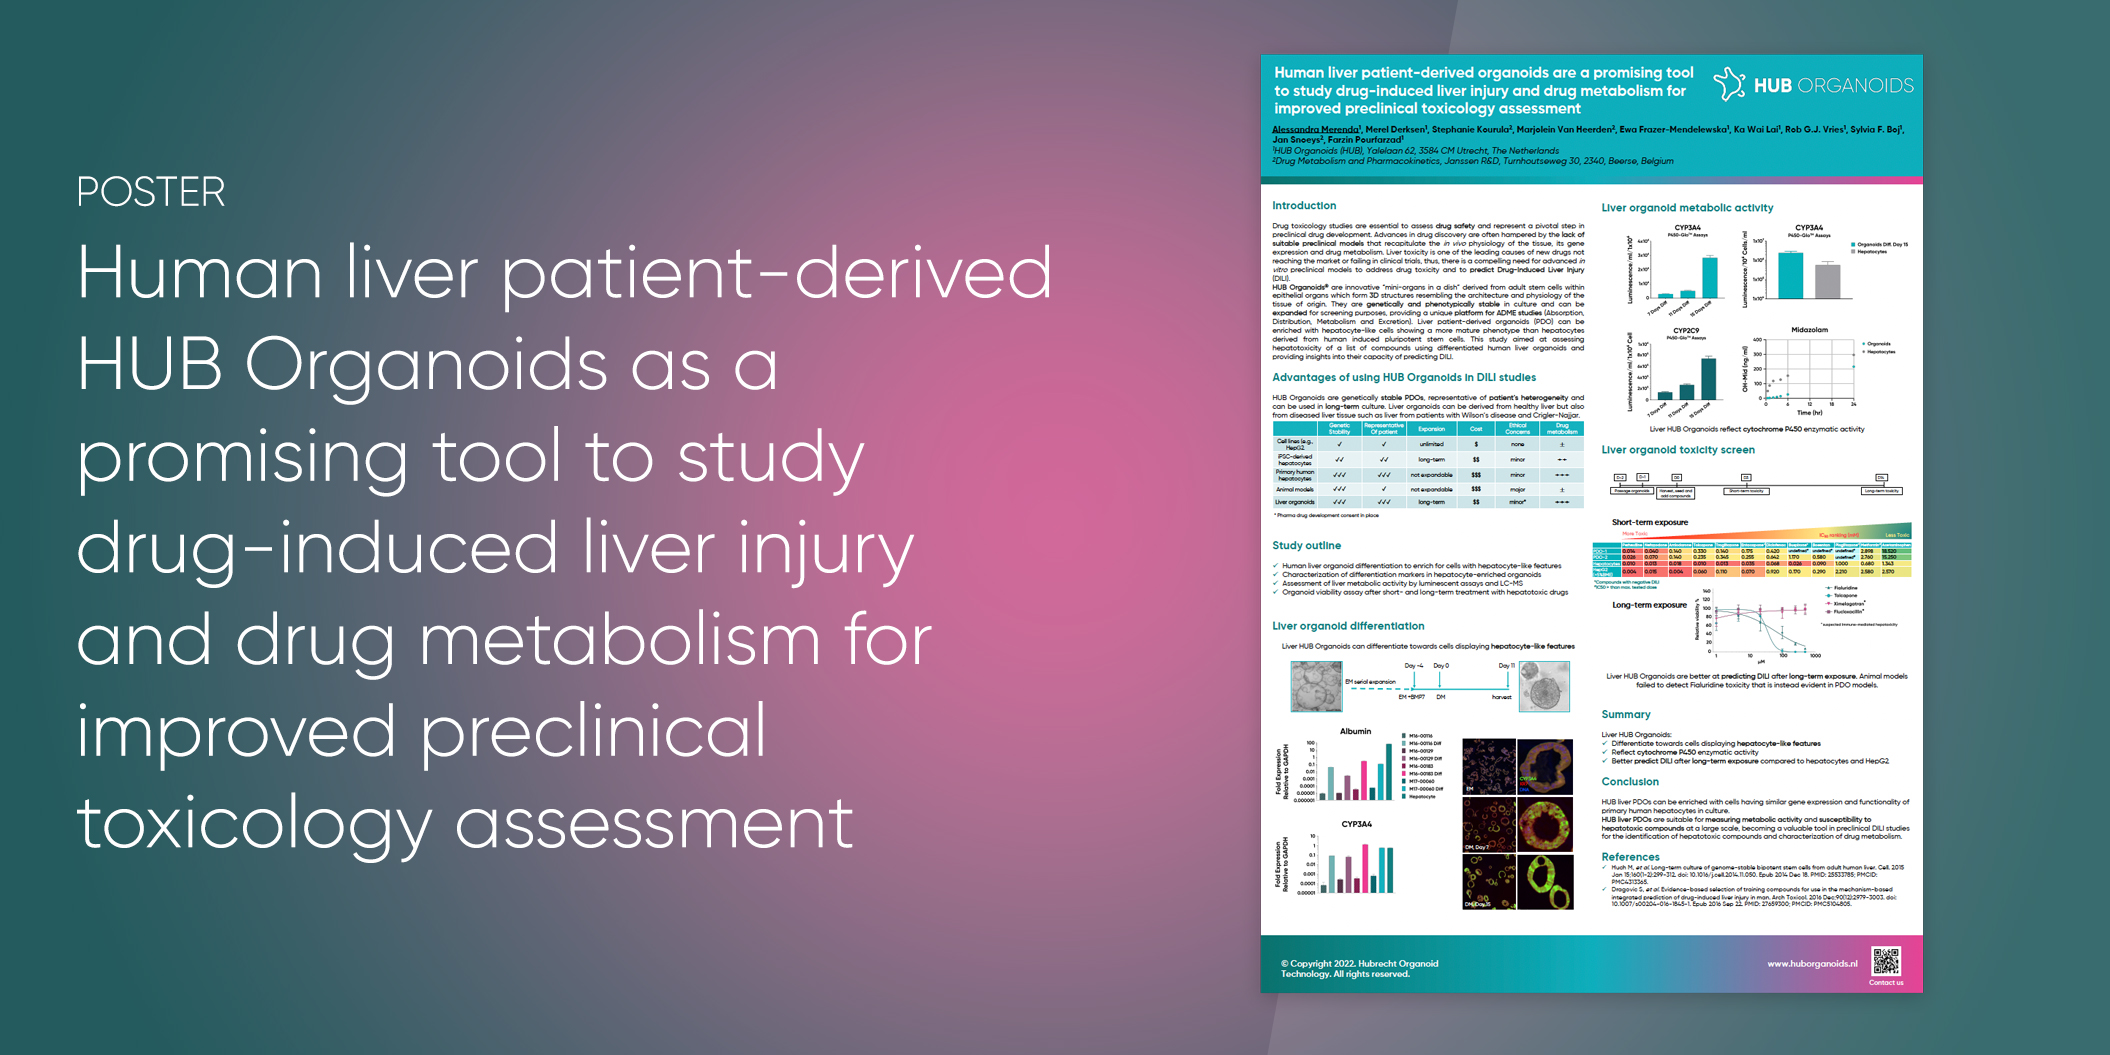 Human liver patient-derived HUB Organoids as a promising tool to study drug-induced liver injury and drug metabolism for improved preclinical toxicology assessment